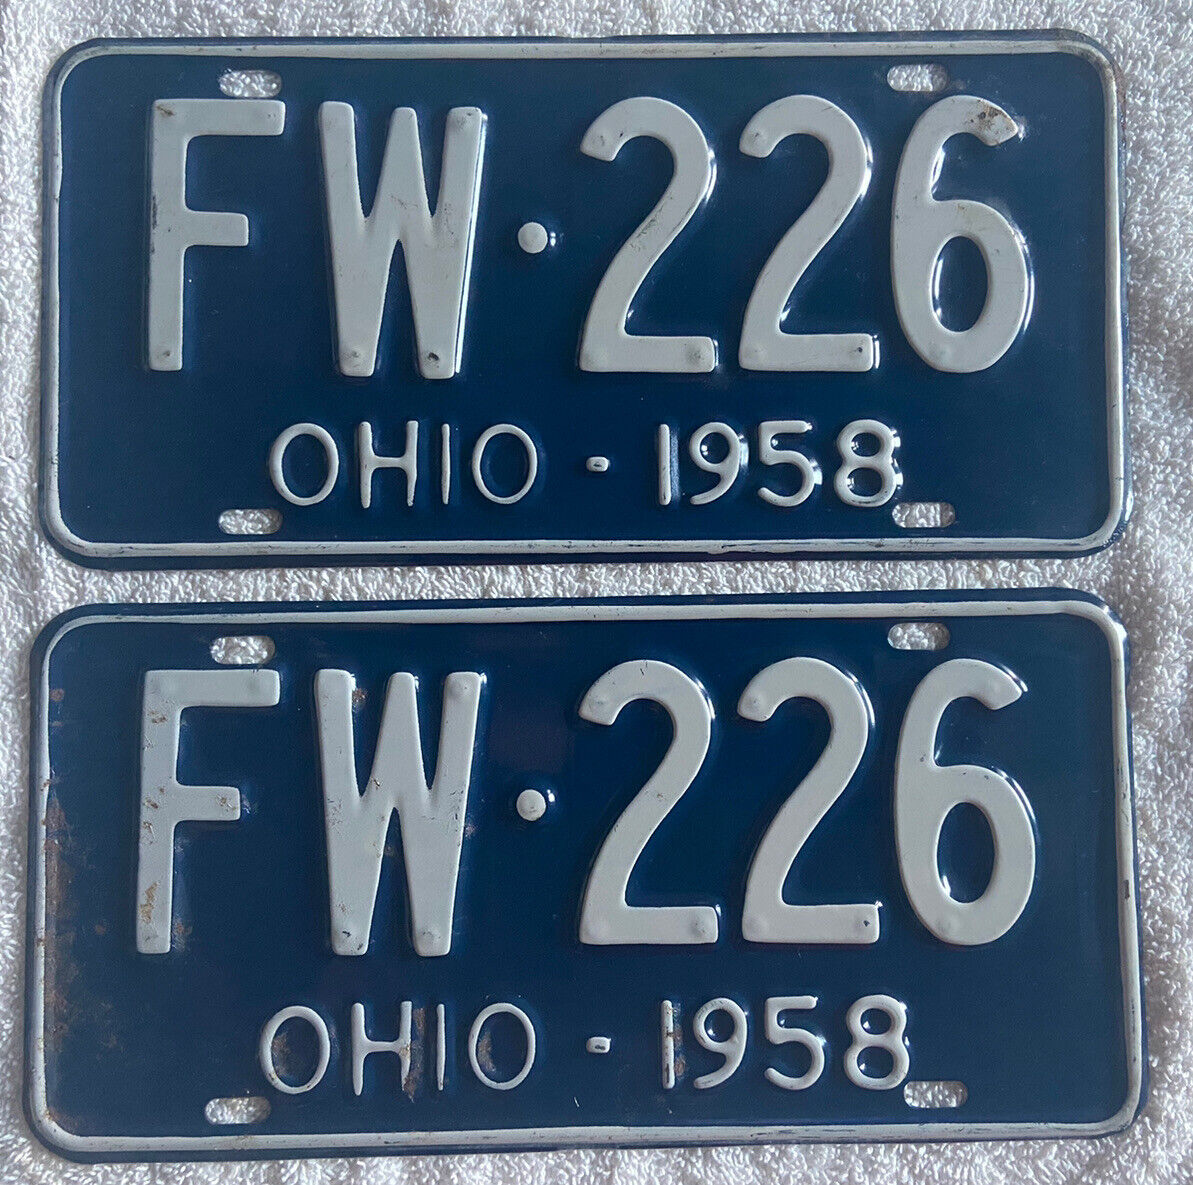 Good Solid Pair Of 1958 Ohio License Plates See My Other Plates